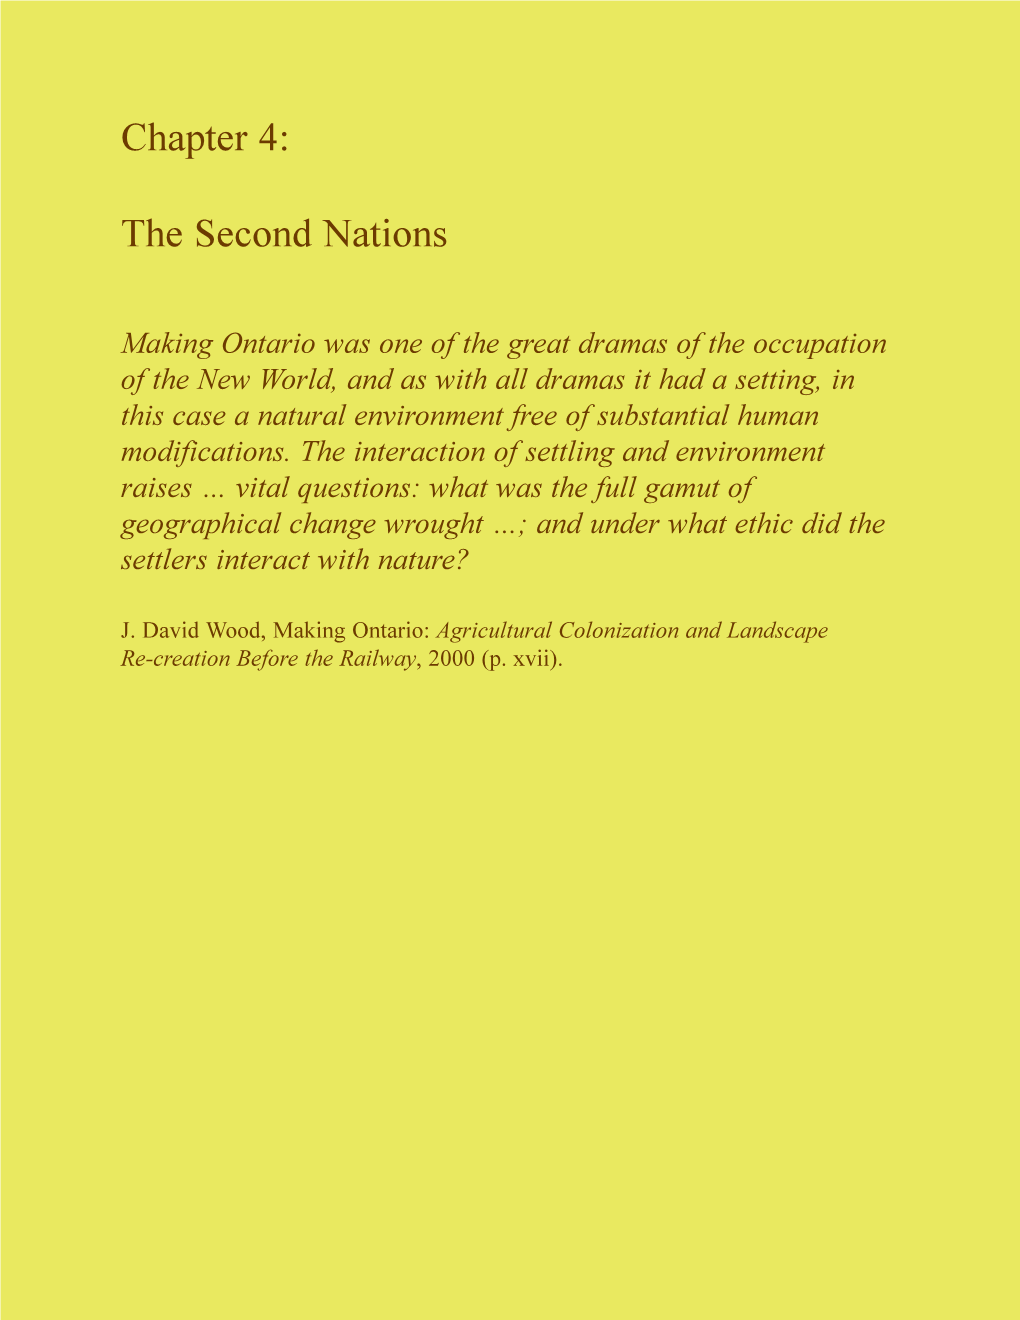 Chapter 4: the Second Nations